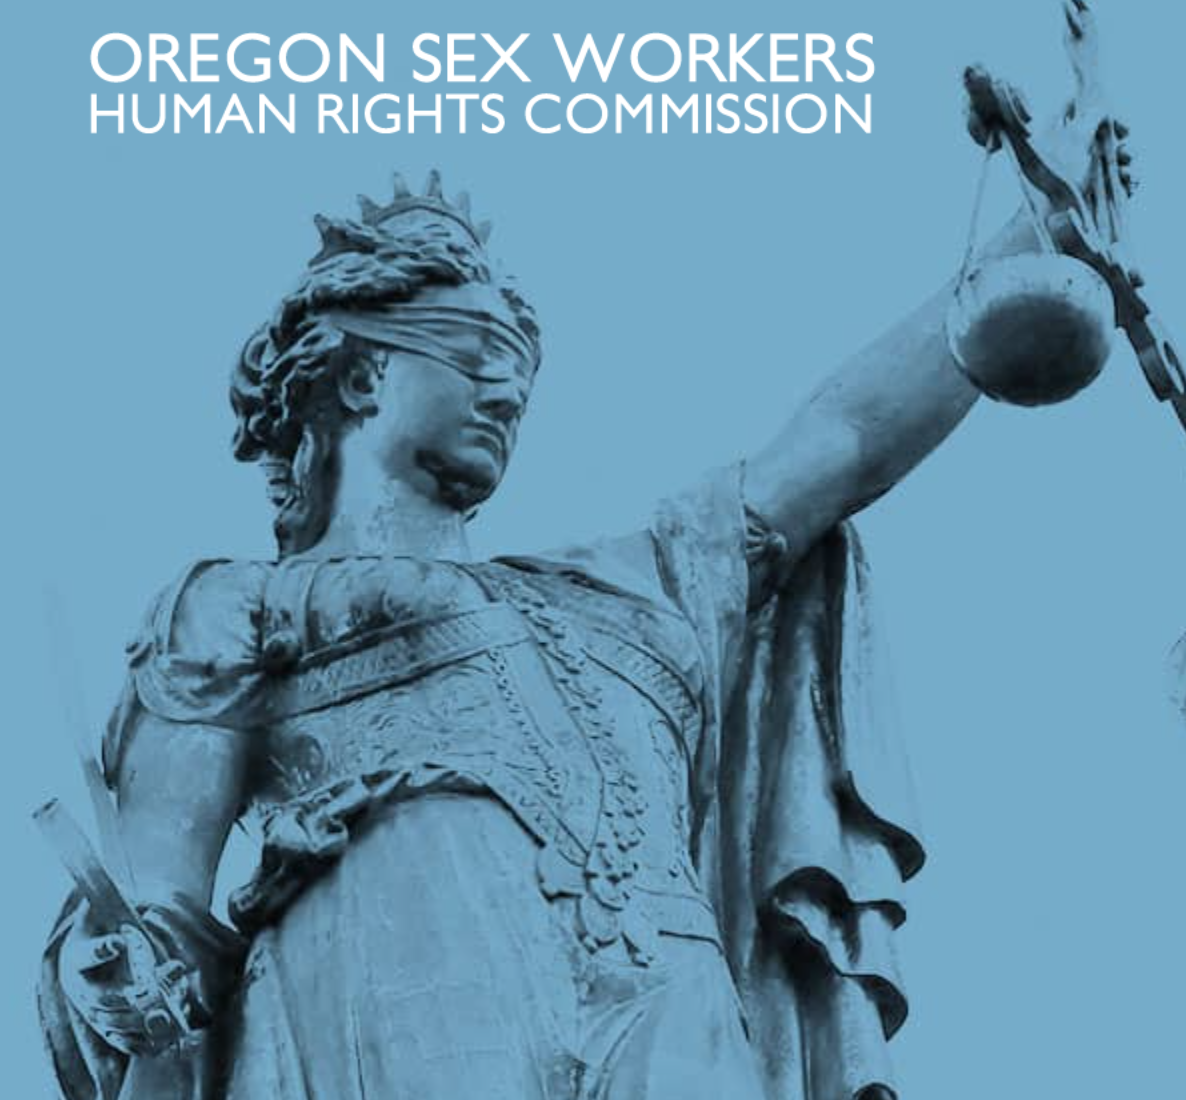 Oregon Sex Workers Human Rights Commission